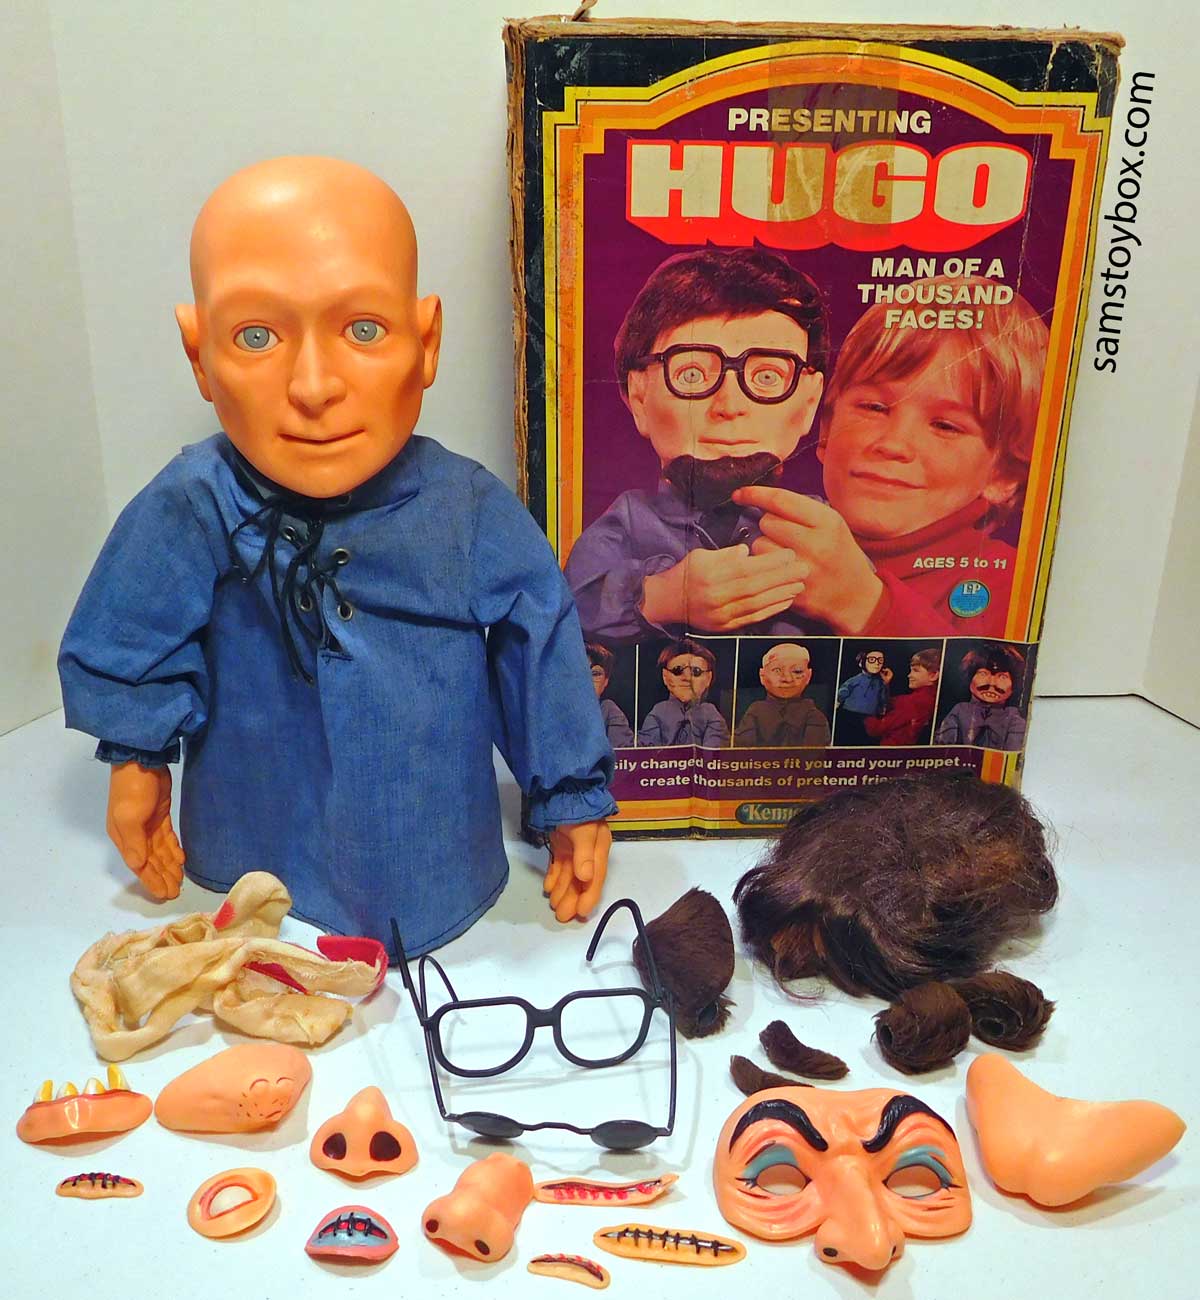 Hugo, Man of a Thousand Faces by Kenner Contents